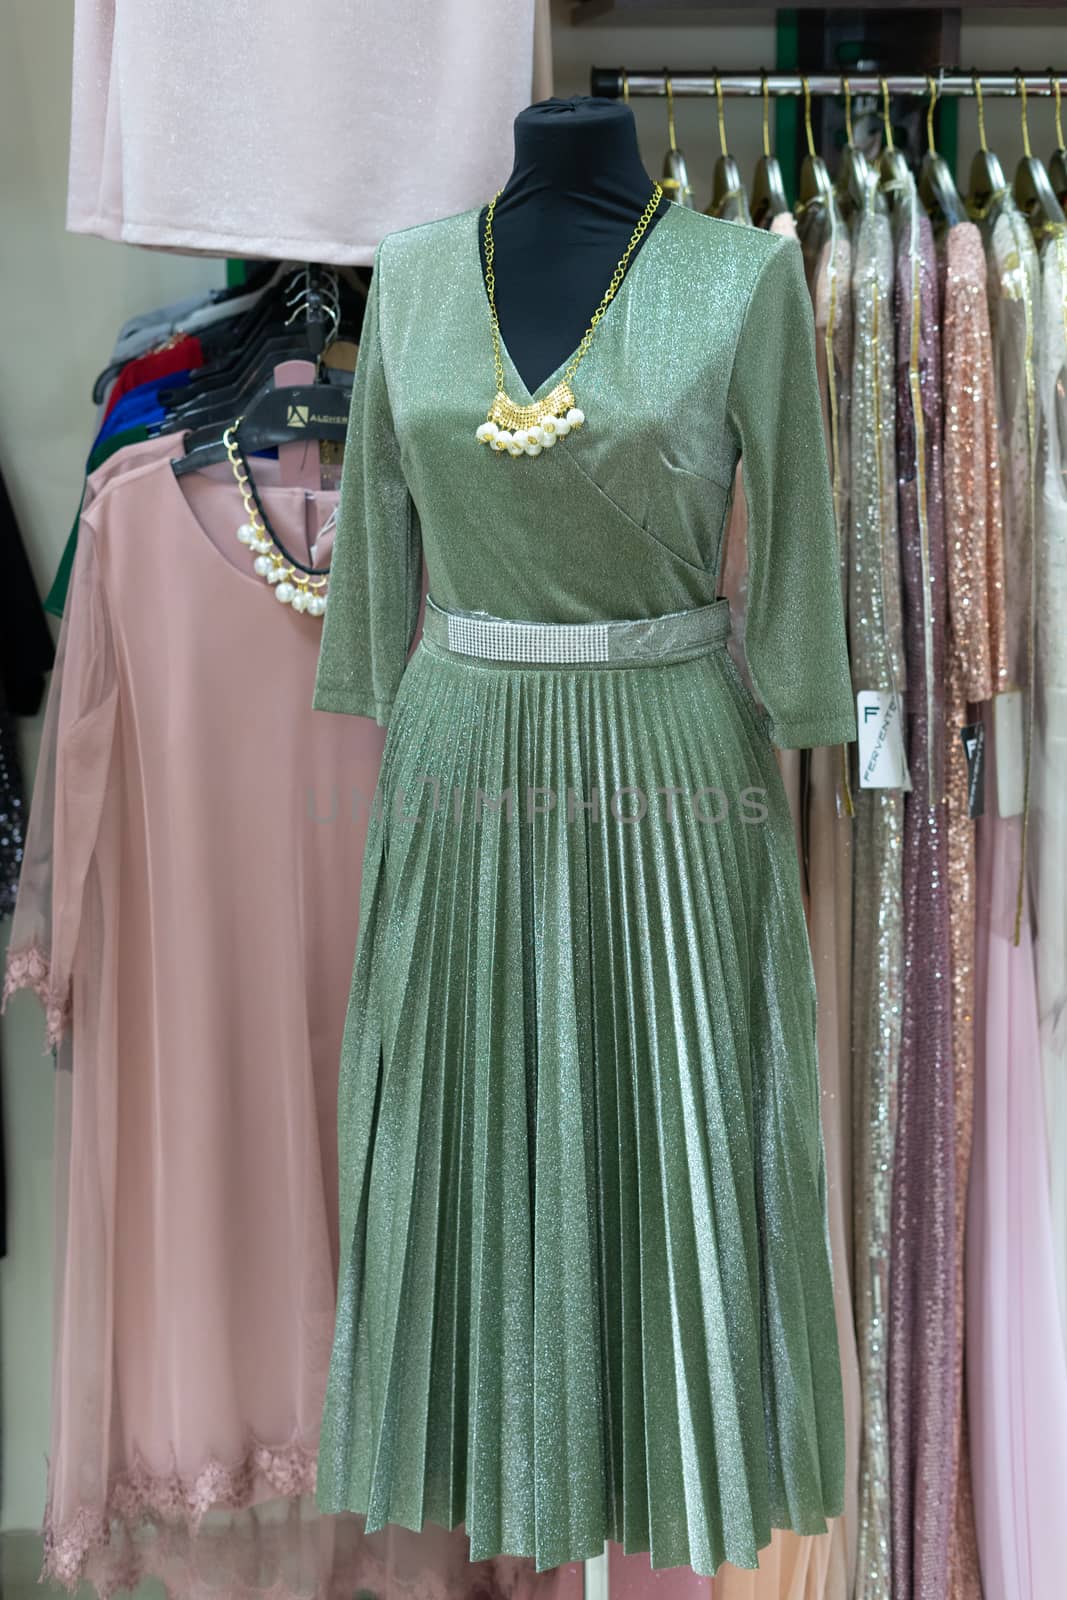 Full length dress. Green dress with a belt hanging on a mannequin. Retail by Serhii_Voroshchuk